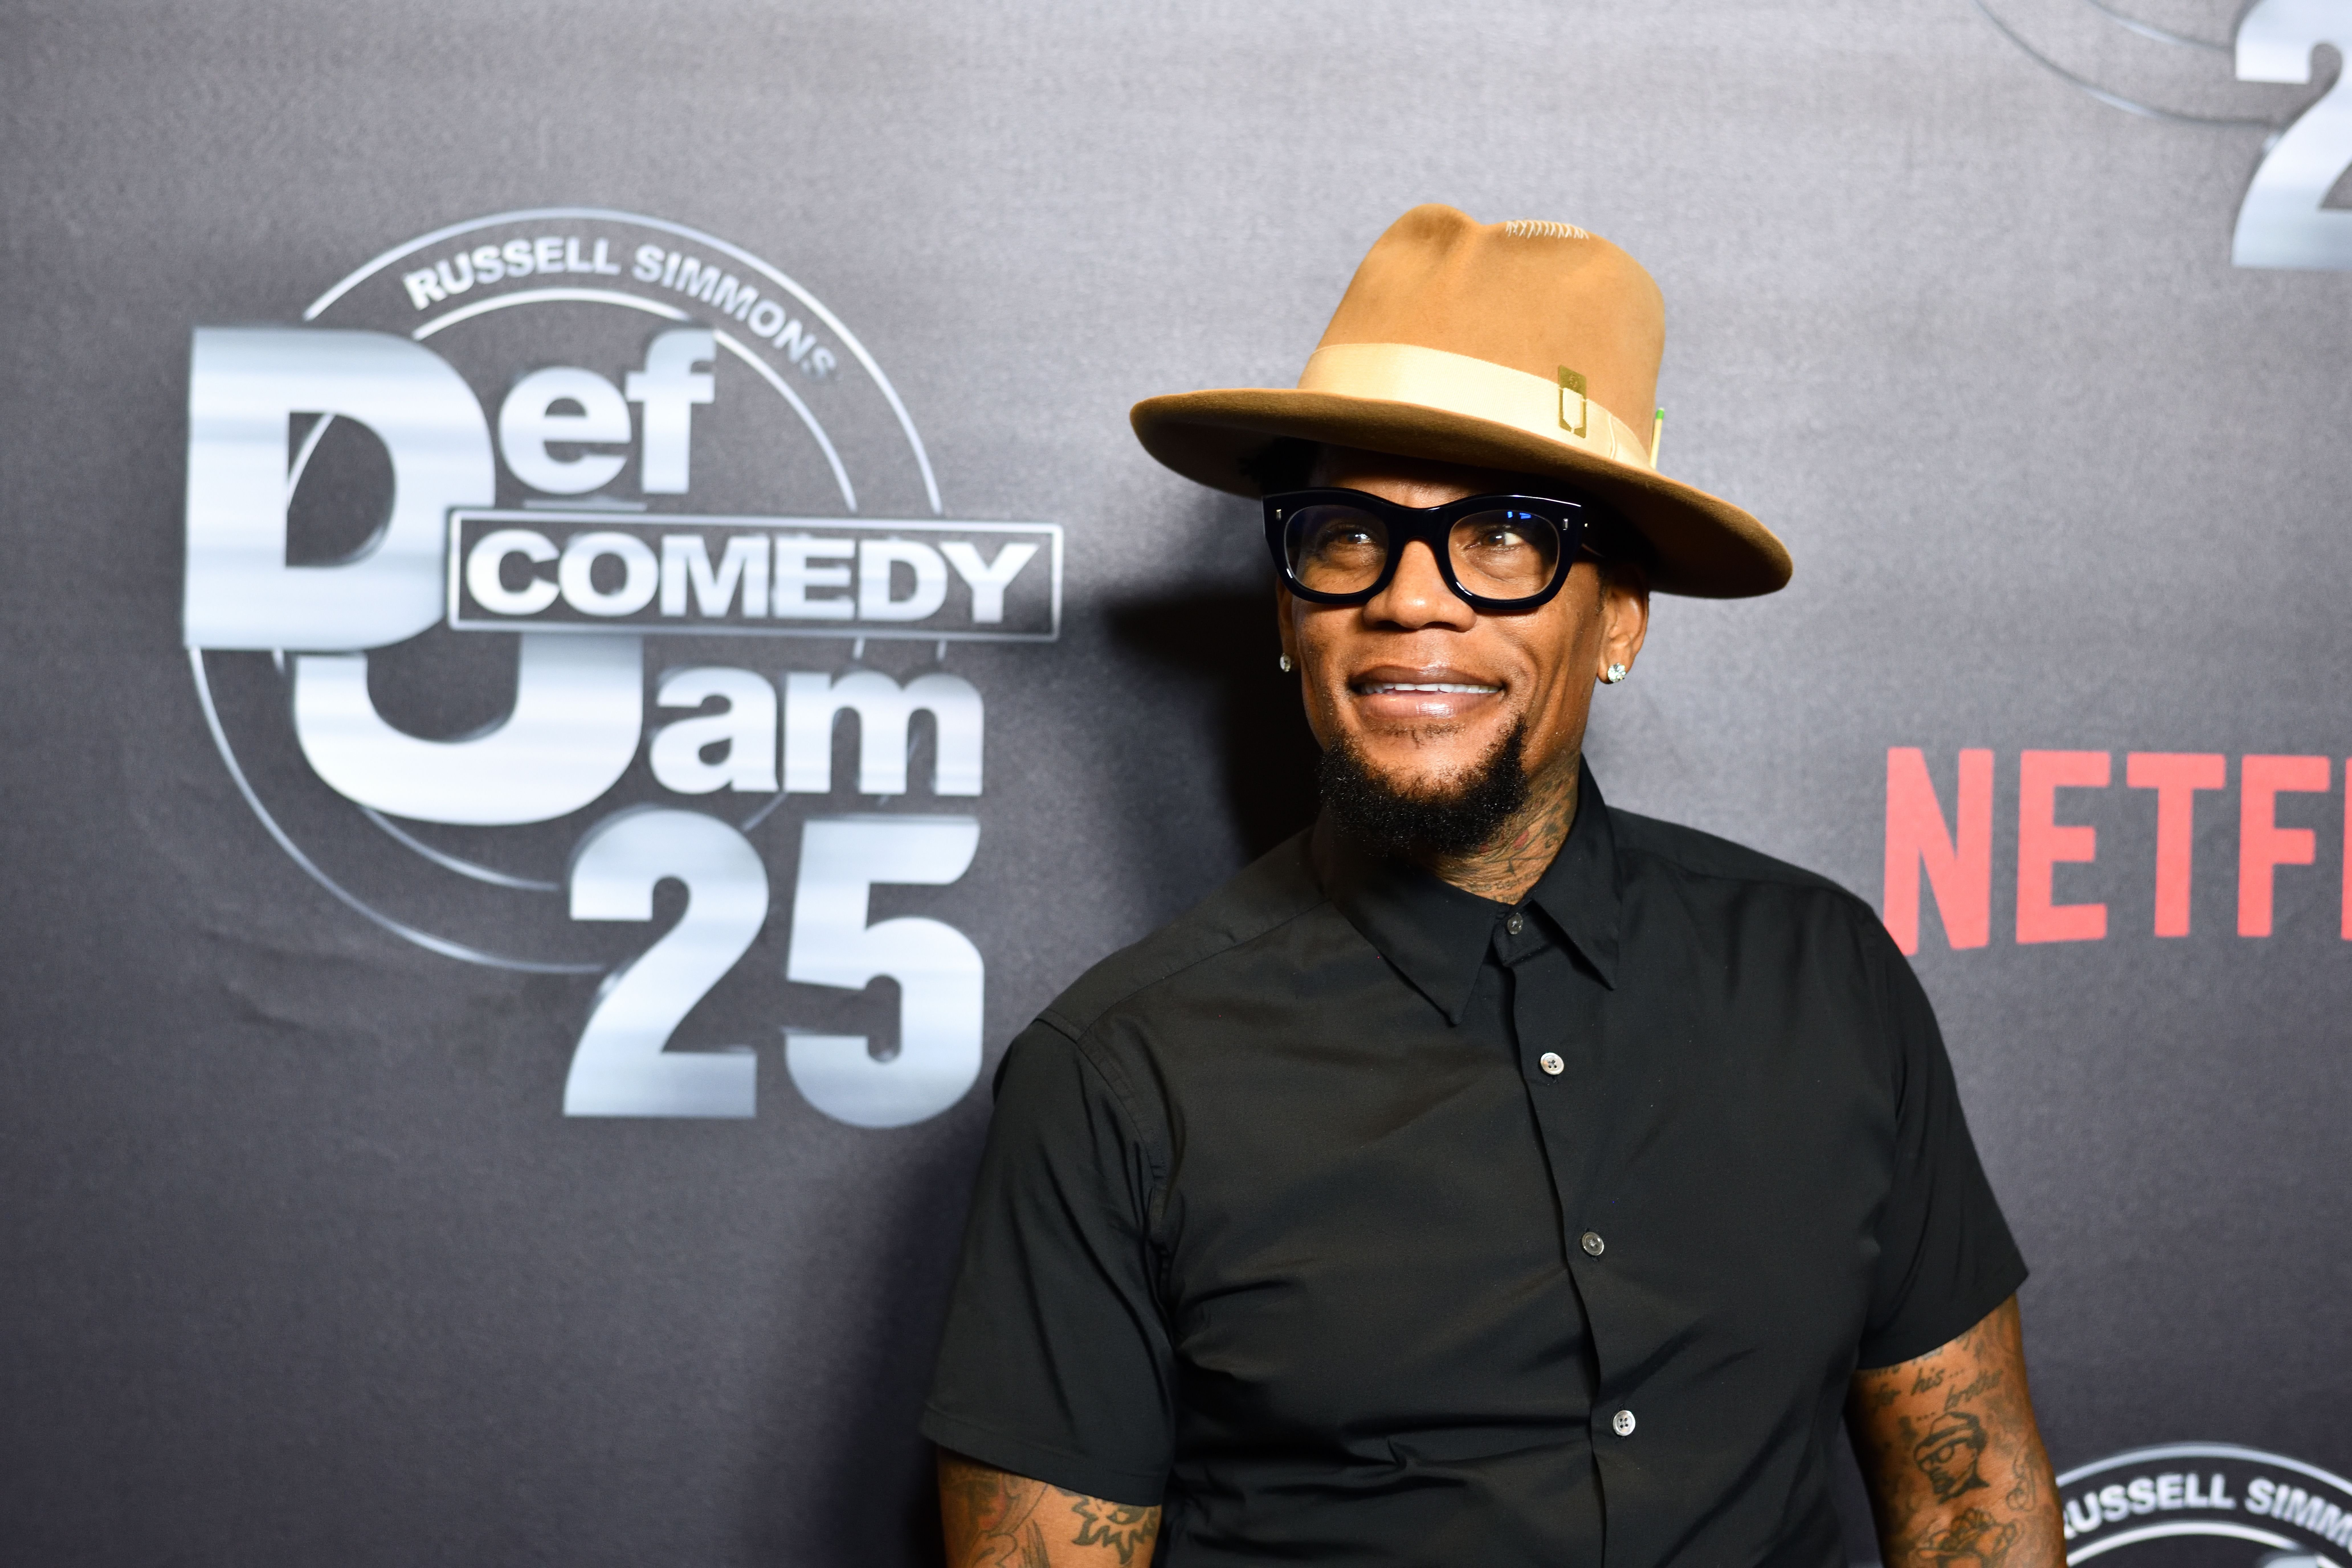 D.L. Hughley during the "Def Comedy Jam 25" Special Event at The Beverly Hilton Hotel on September 10, 2017 in Beverly Hills, California. | Source: Getty Images